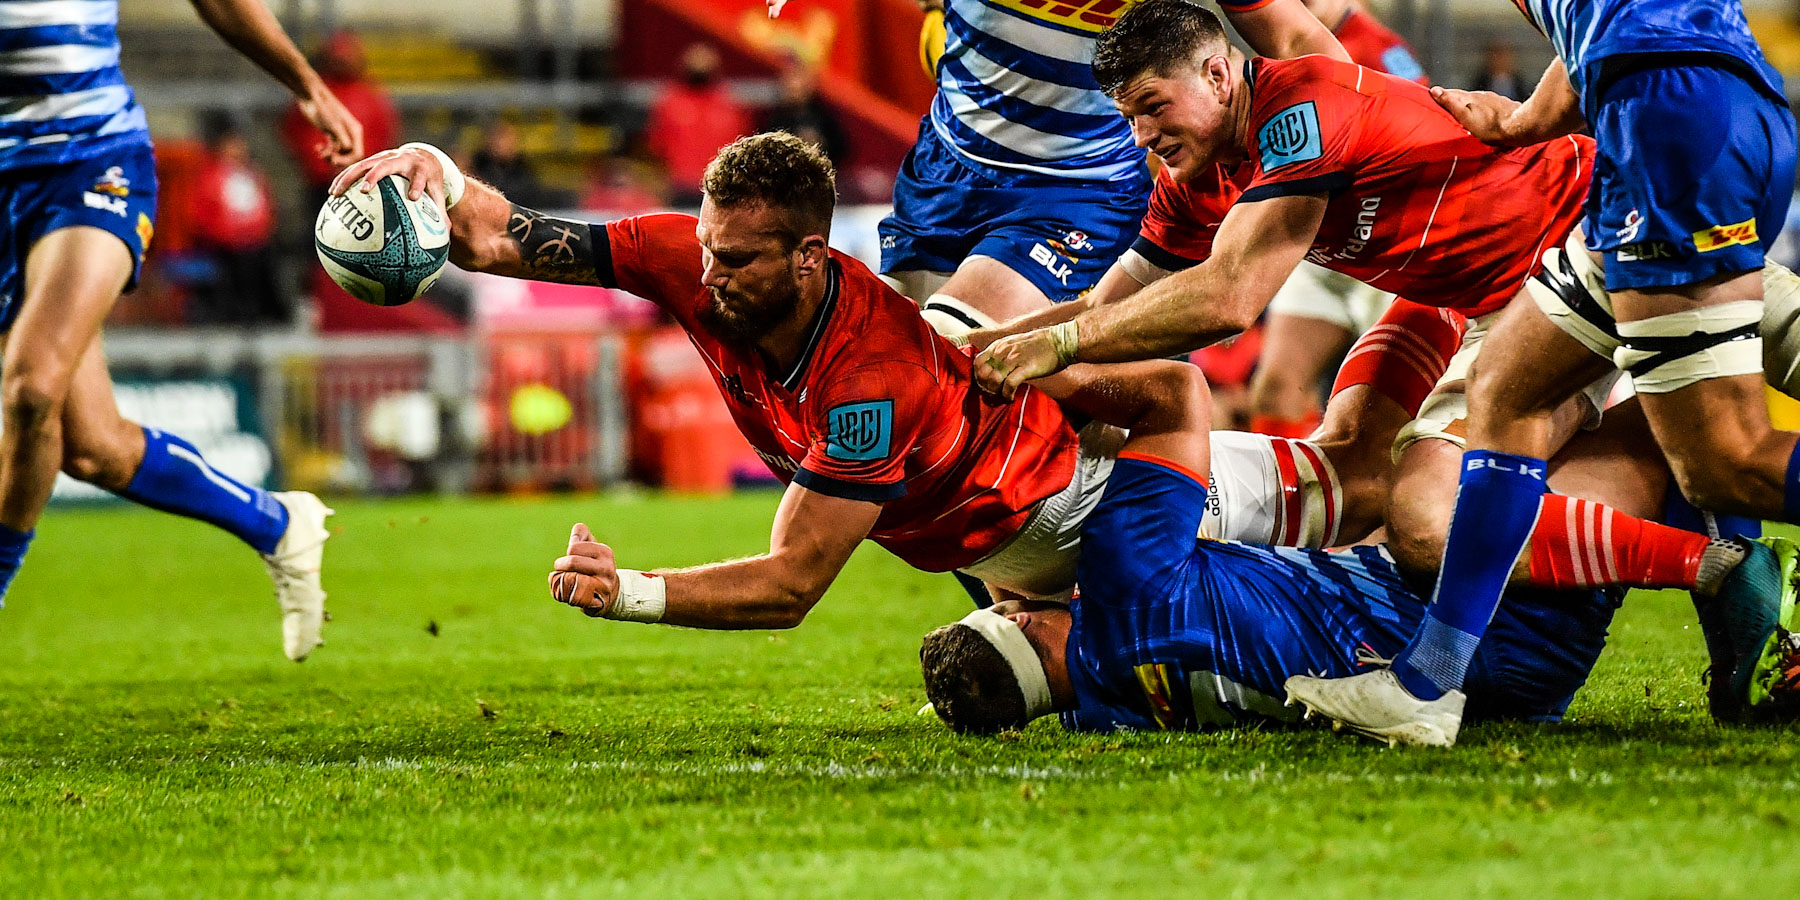 RG Snyman in action for Munster against the DHL Stormers last season.